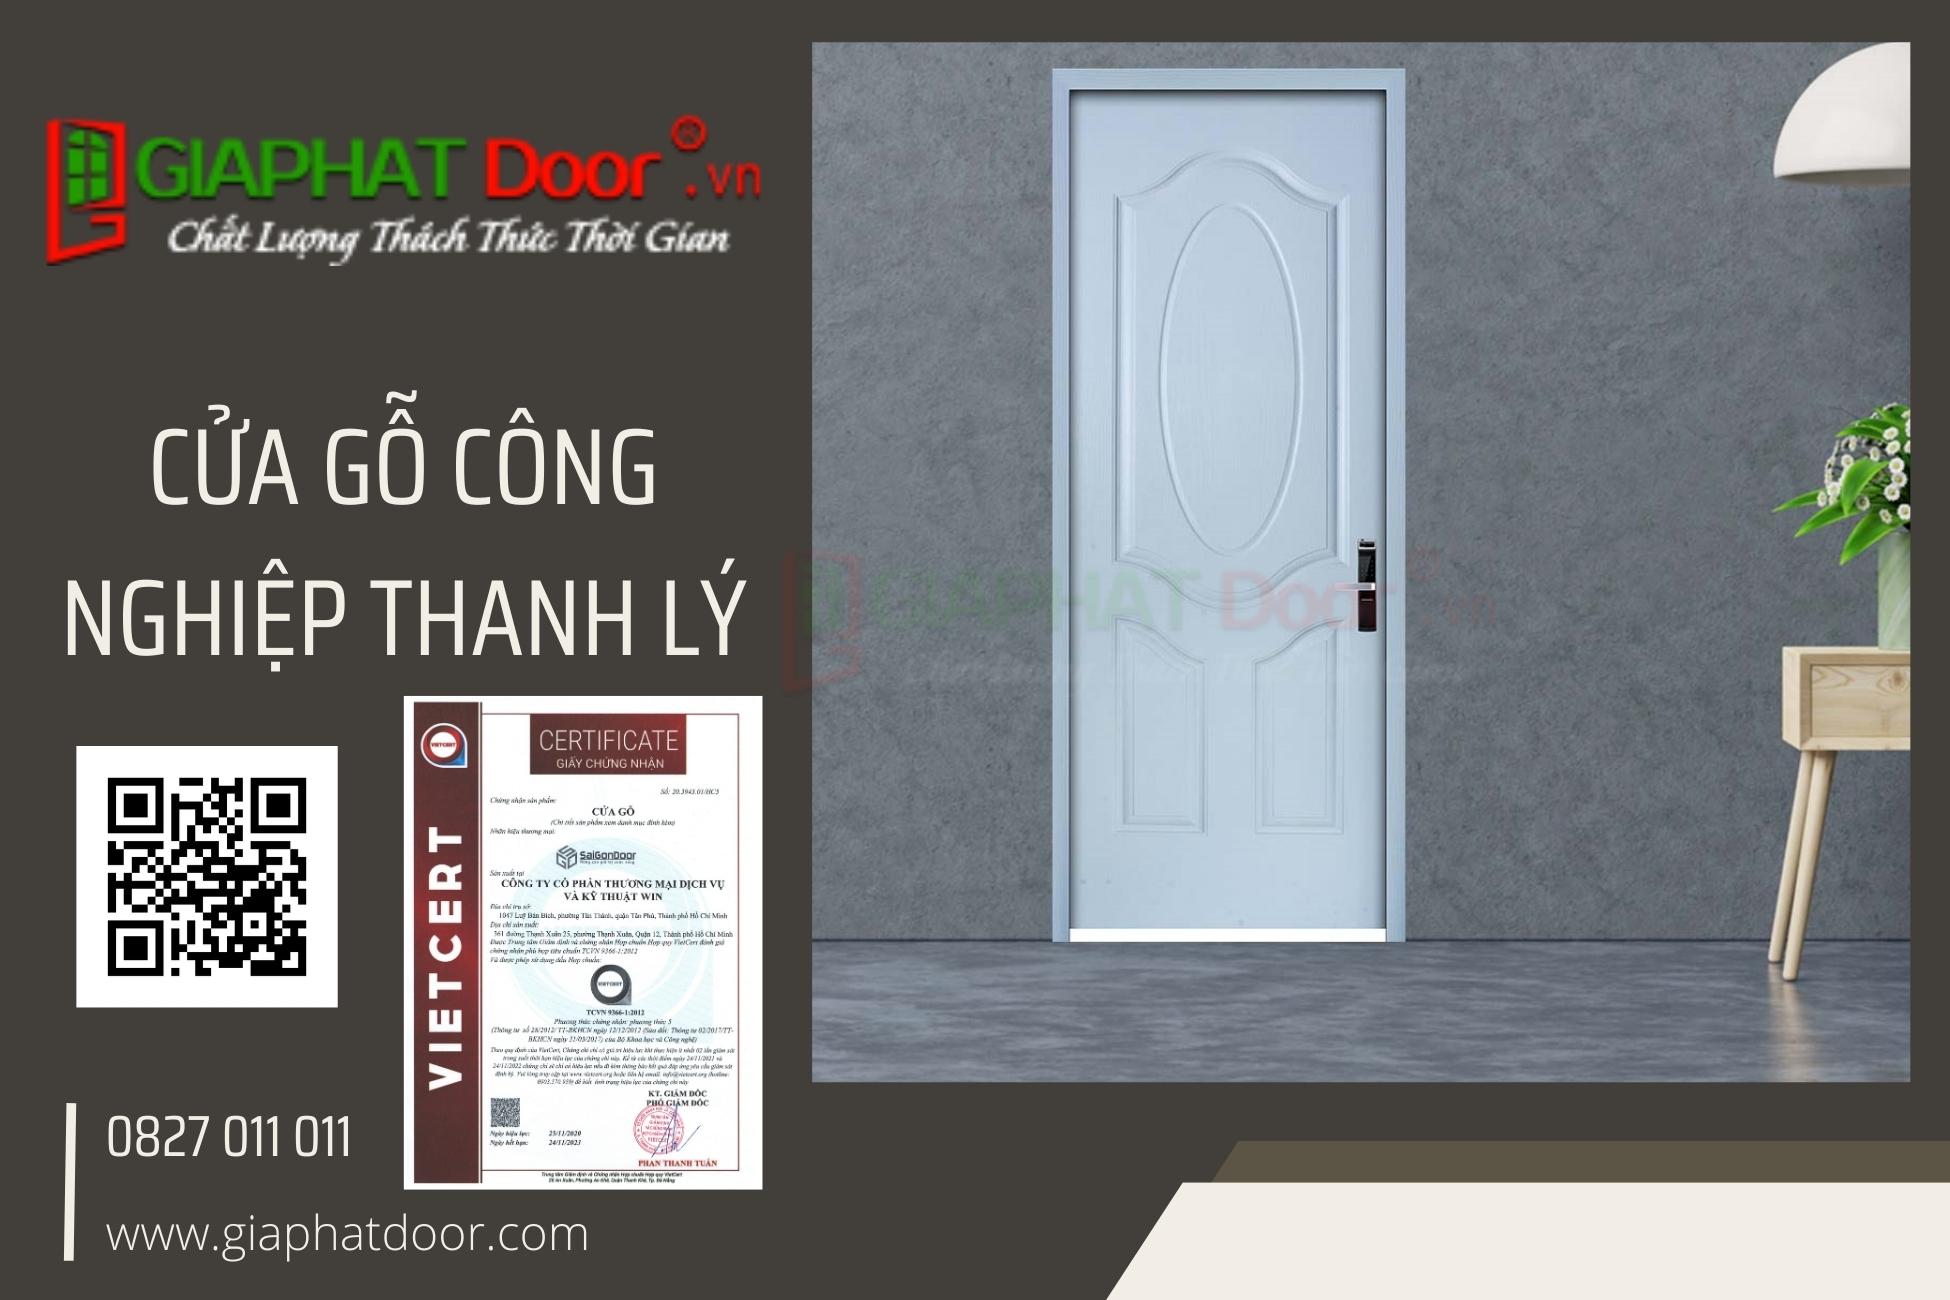 cua-go-cong-nghiep-thanh-ly5